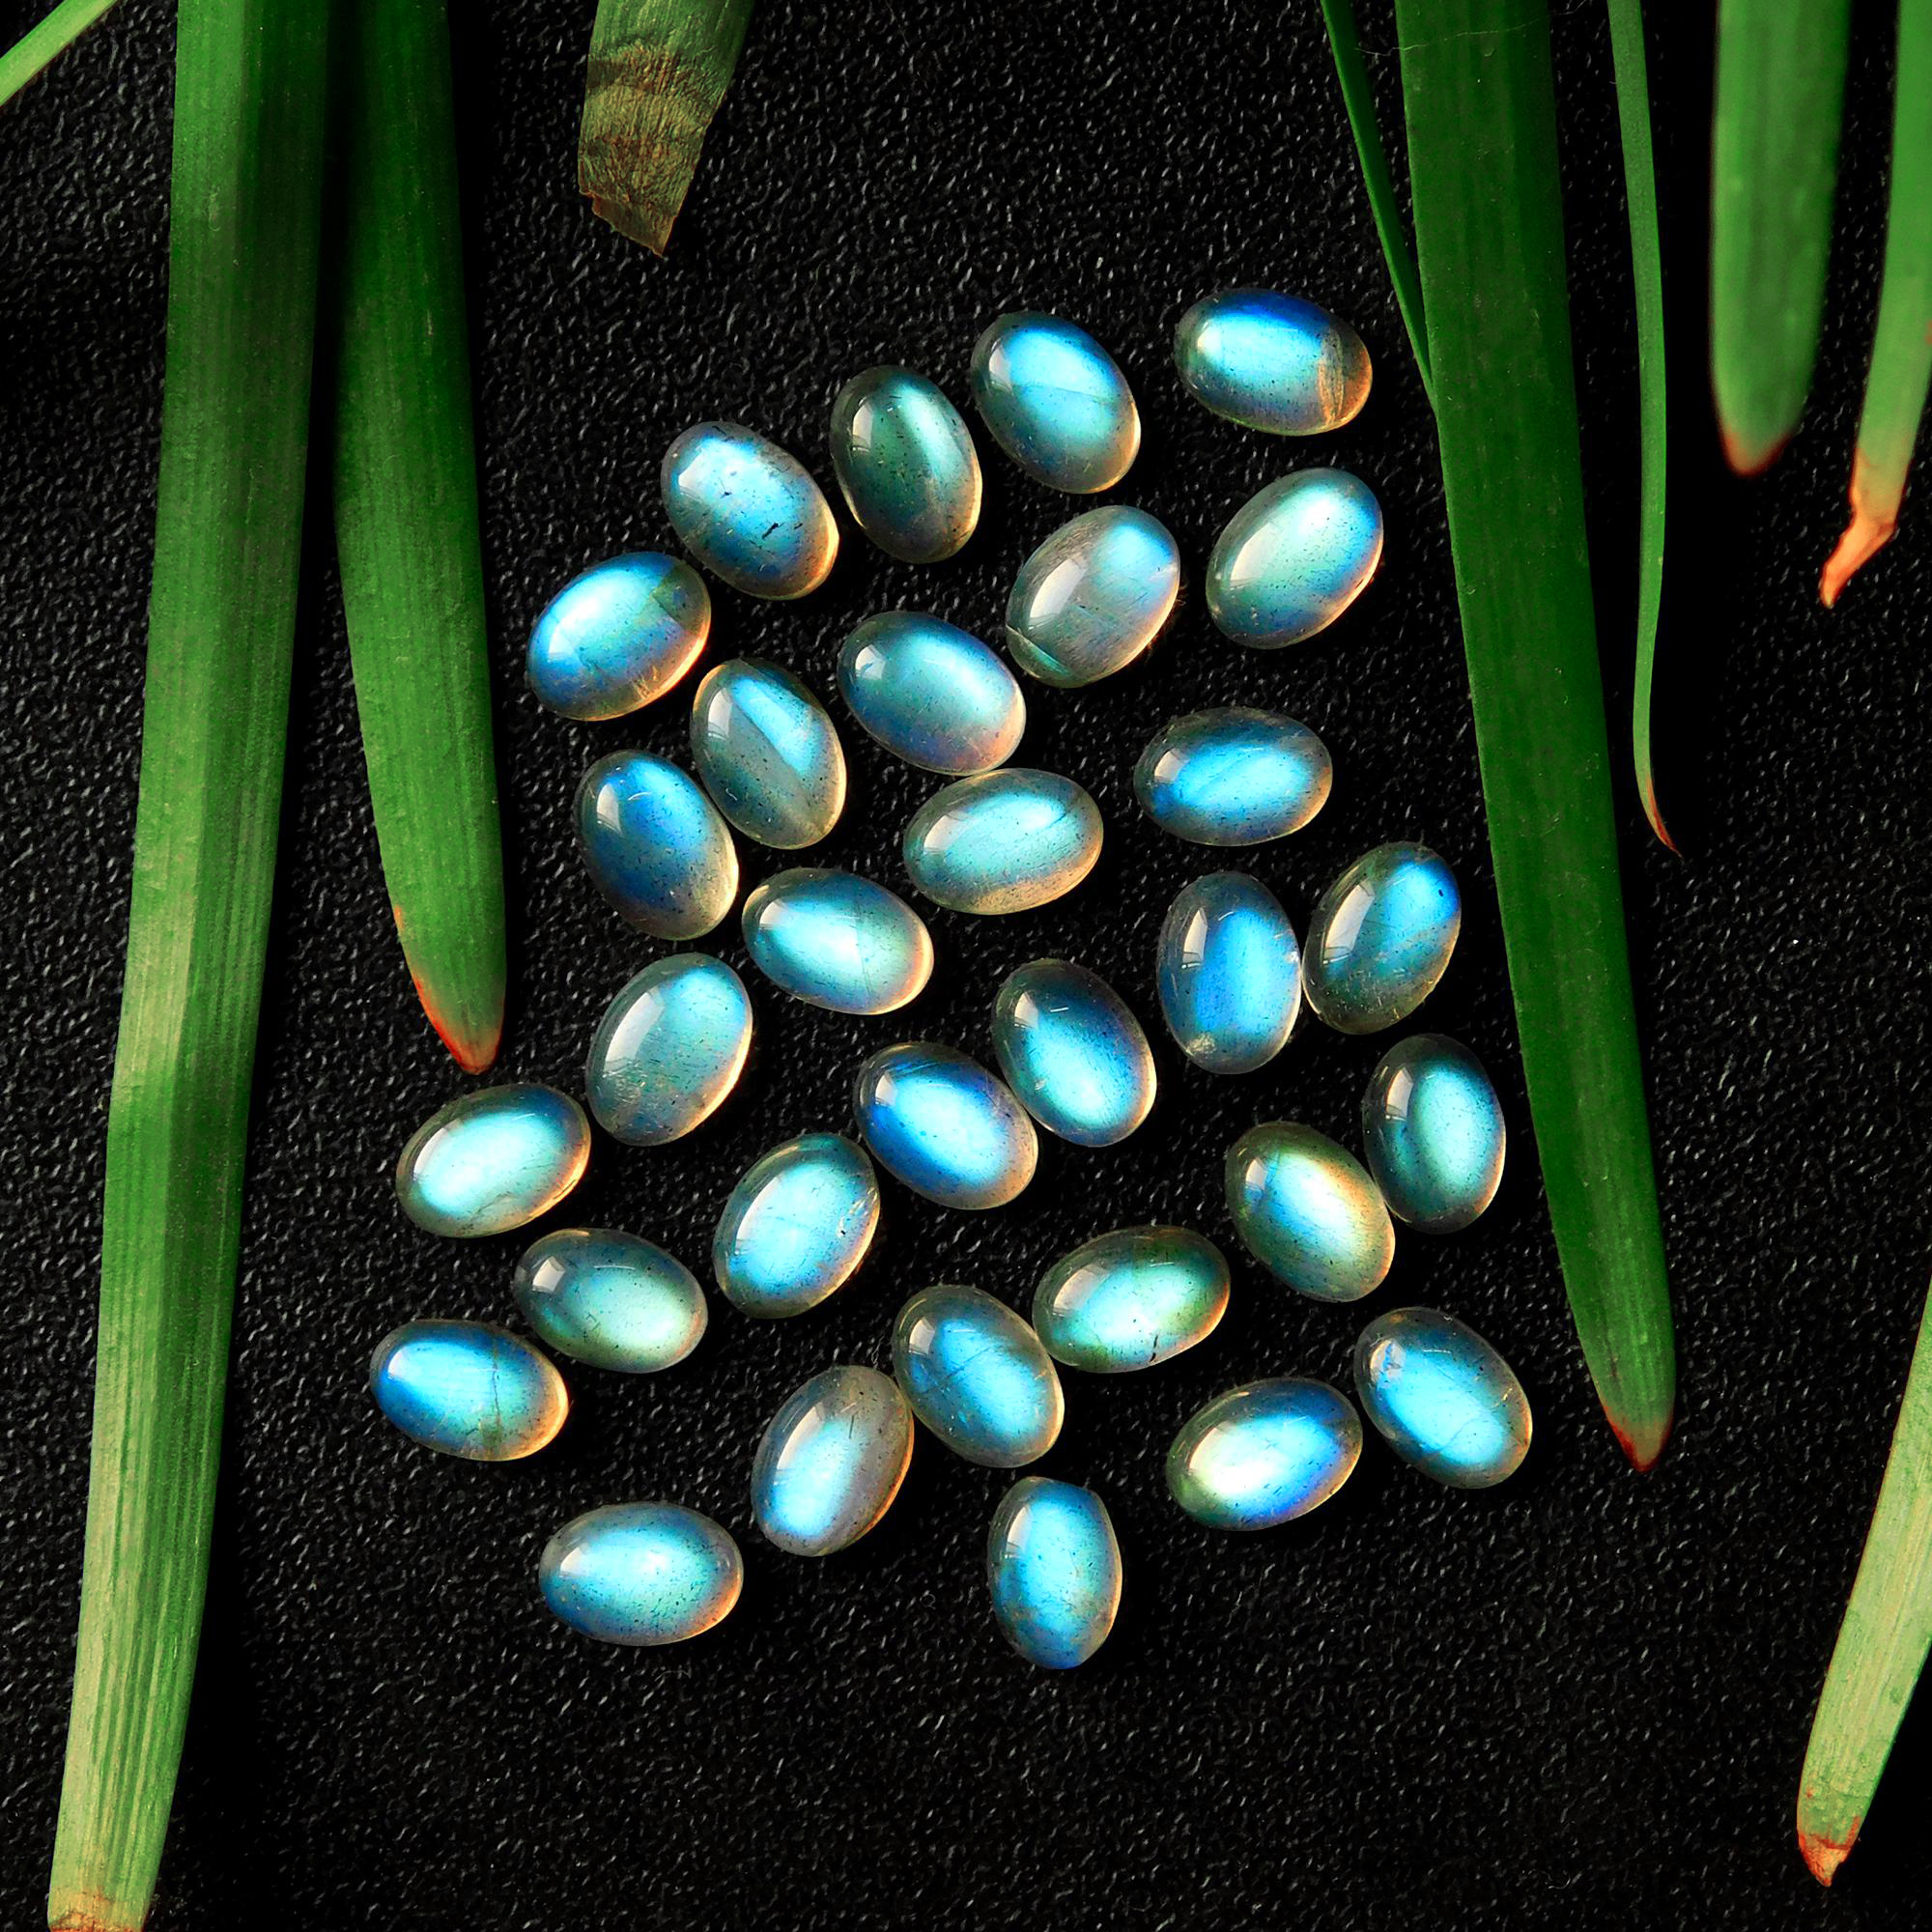 31 Pcs 29.45 Cts Natural Celibrated Labradorite Oval Cabochons Loose Gemstone Wholesale Lot Size 7x5mm